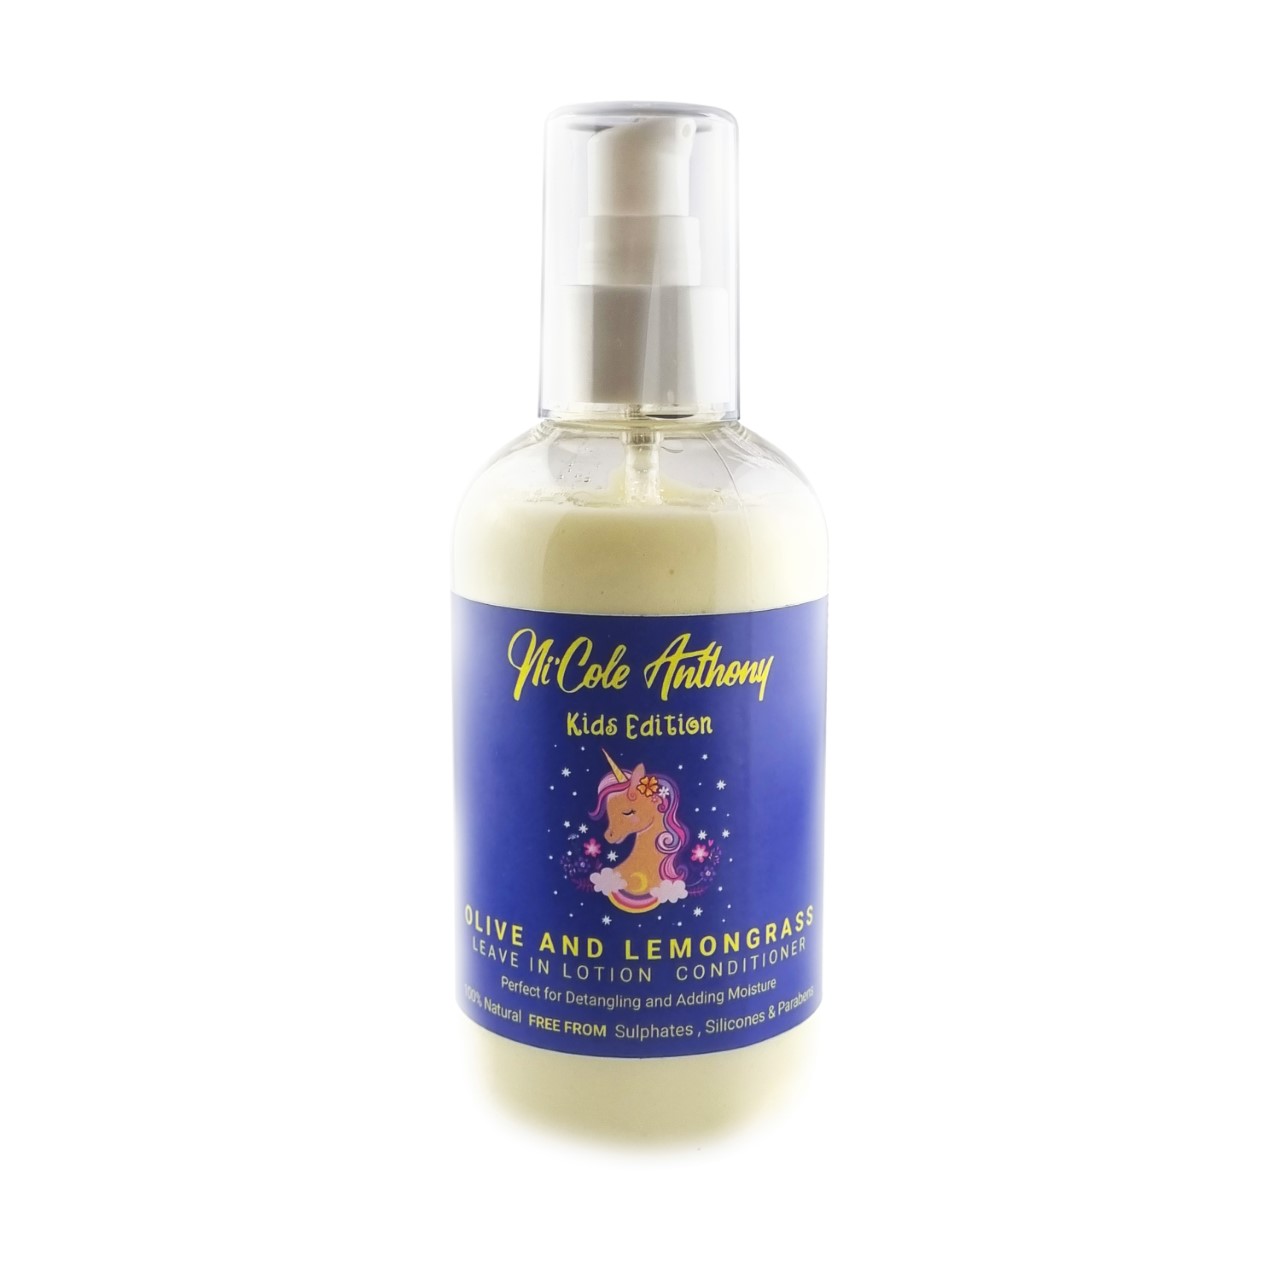 Ni'Cole Anthony Olive and Lemongrass Leave-In-Lotion-Conditioner Kids